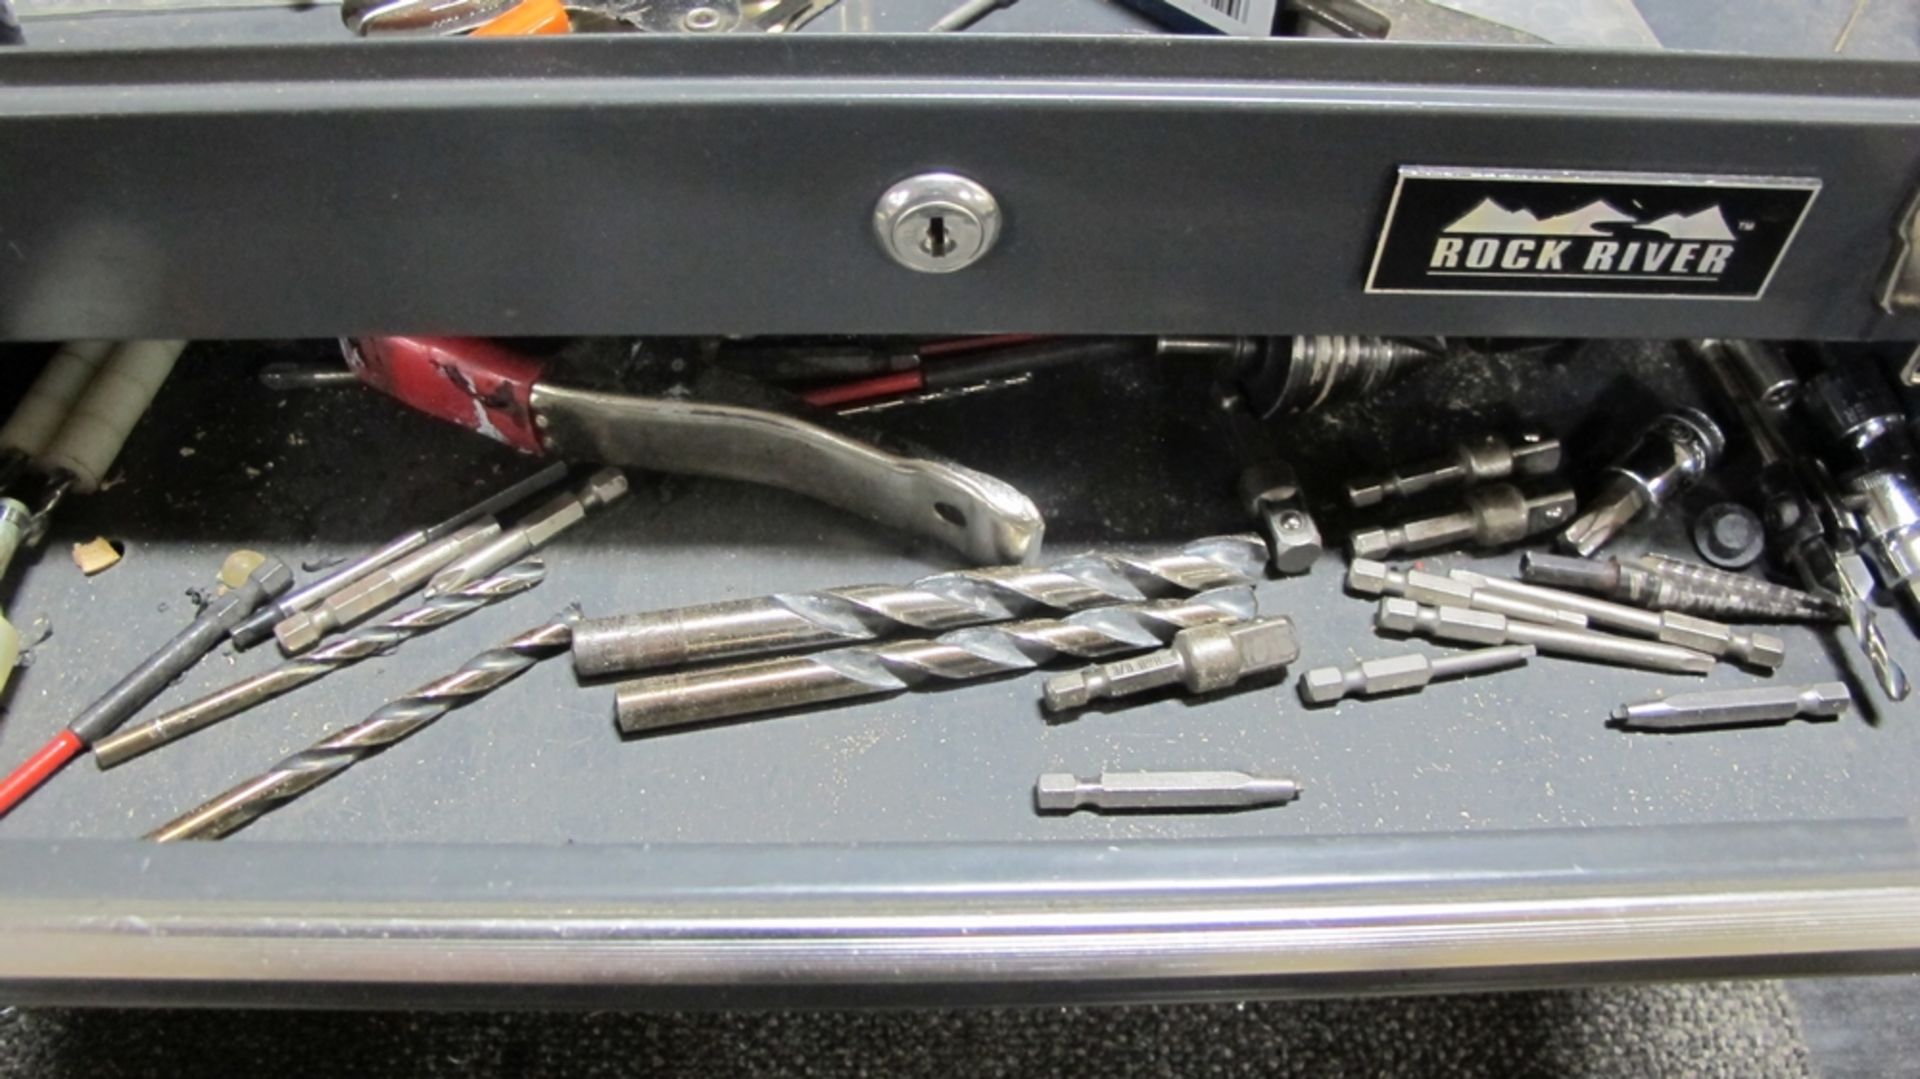 LOT OF 2 ROCK RIVER TOOL BOXES, 10 DRAWERS W/TOOLS (100 SHIRLEY AVE KITCHENER) - Image 3 of 10